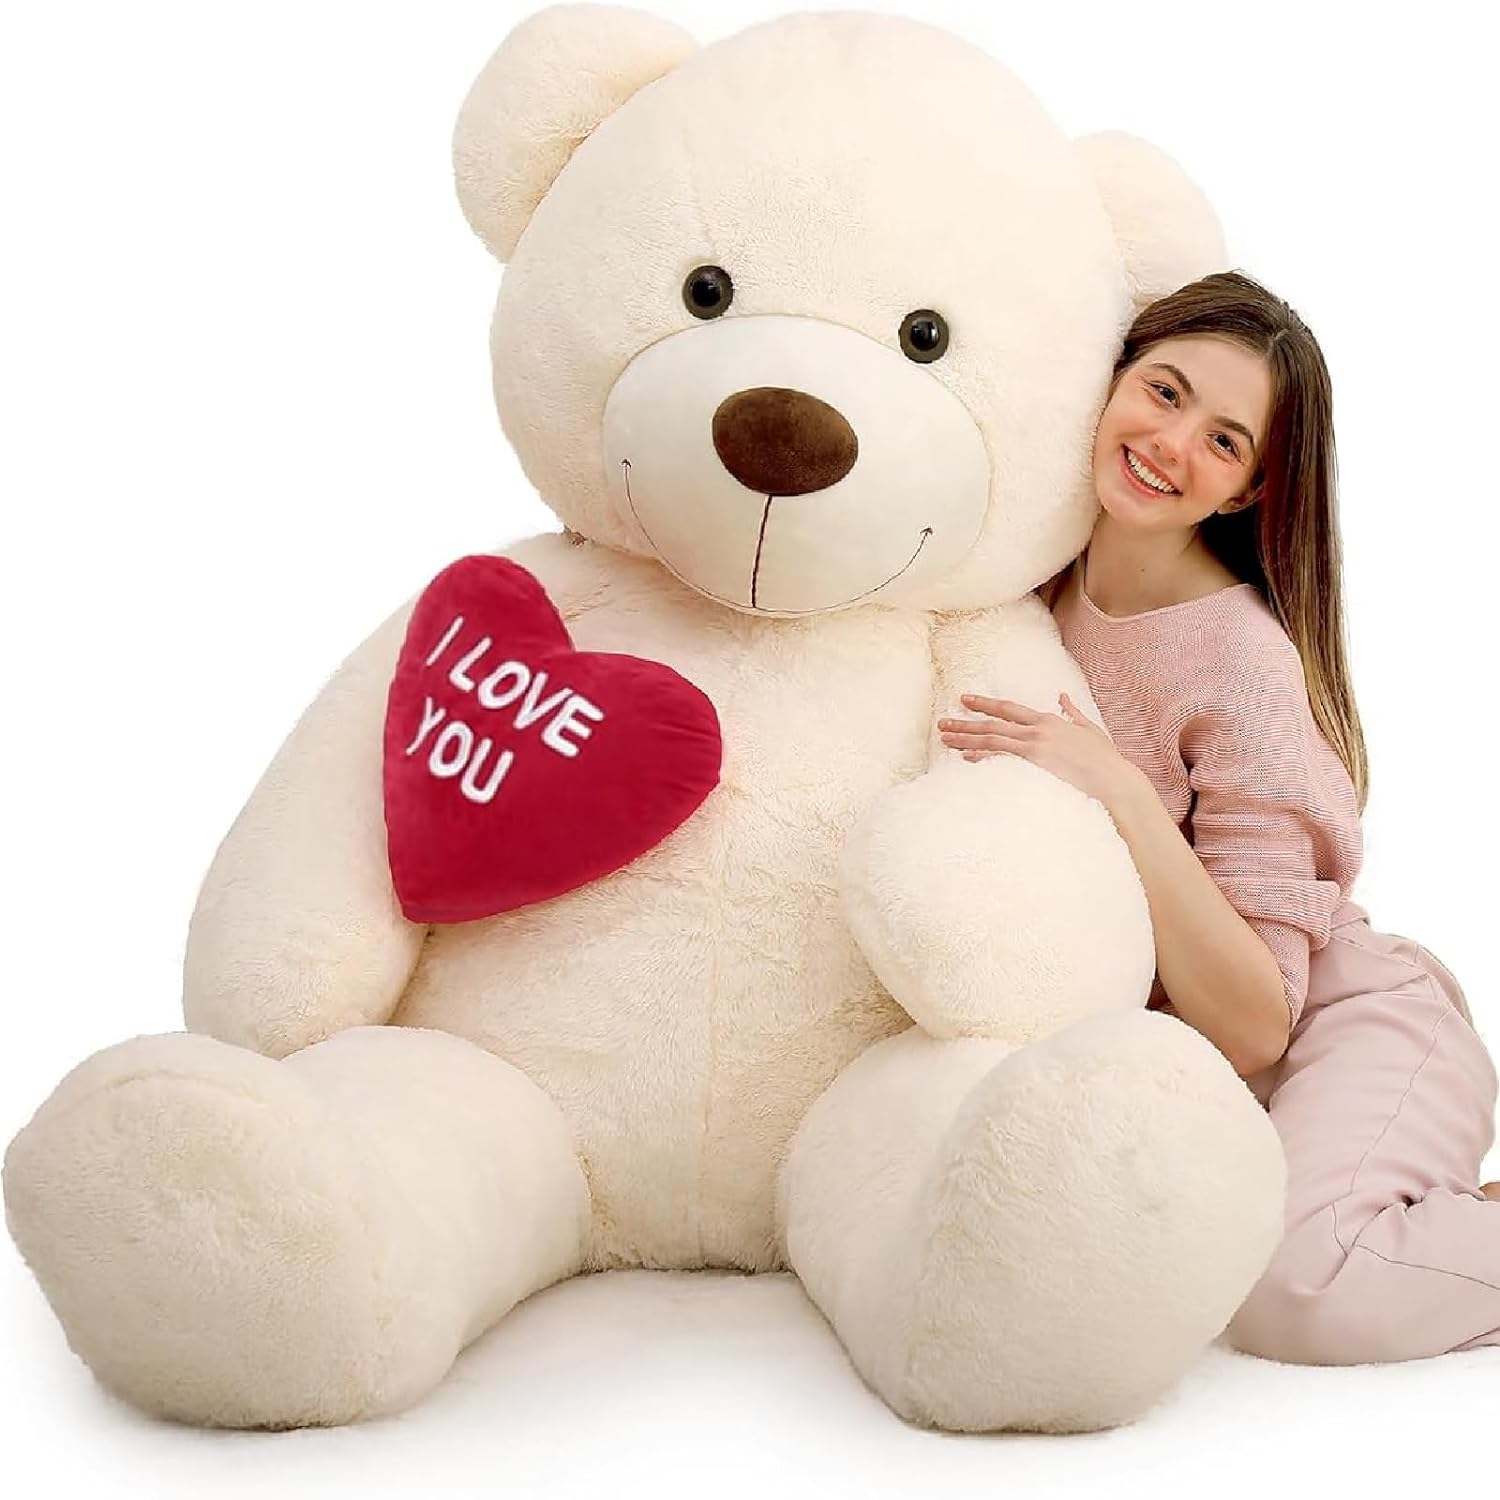 Giant Teddy Bear Plush Toy, Brown/Beige/Pink, 35.4/51/72 Inches